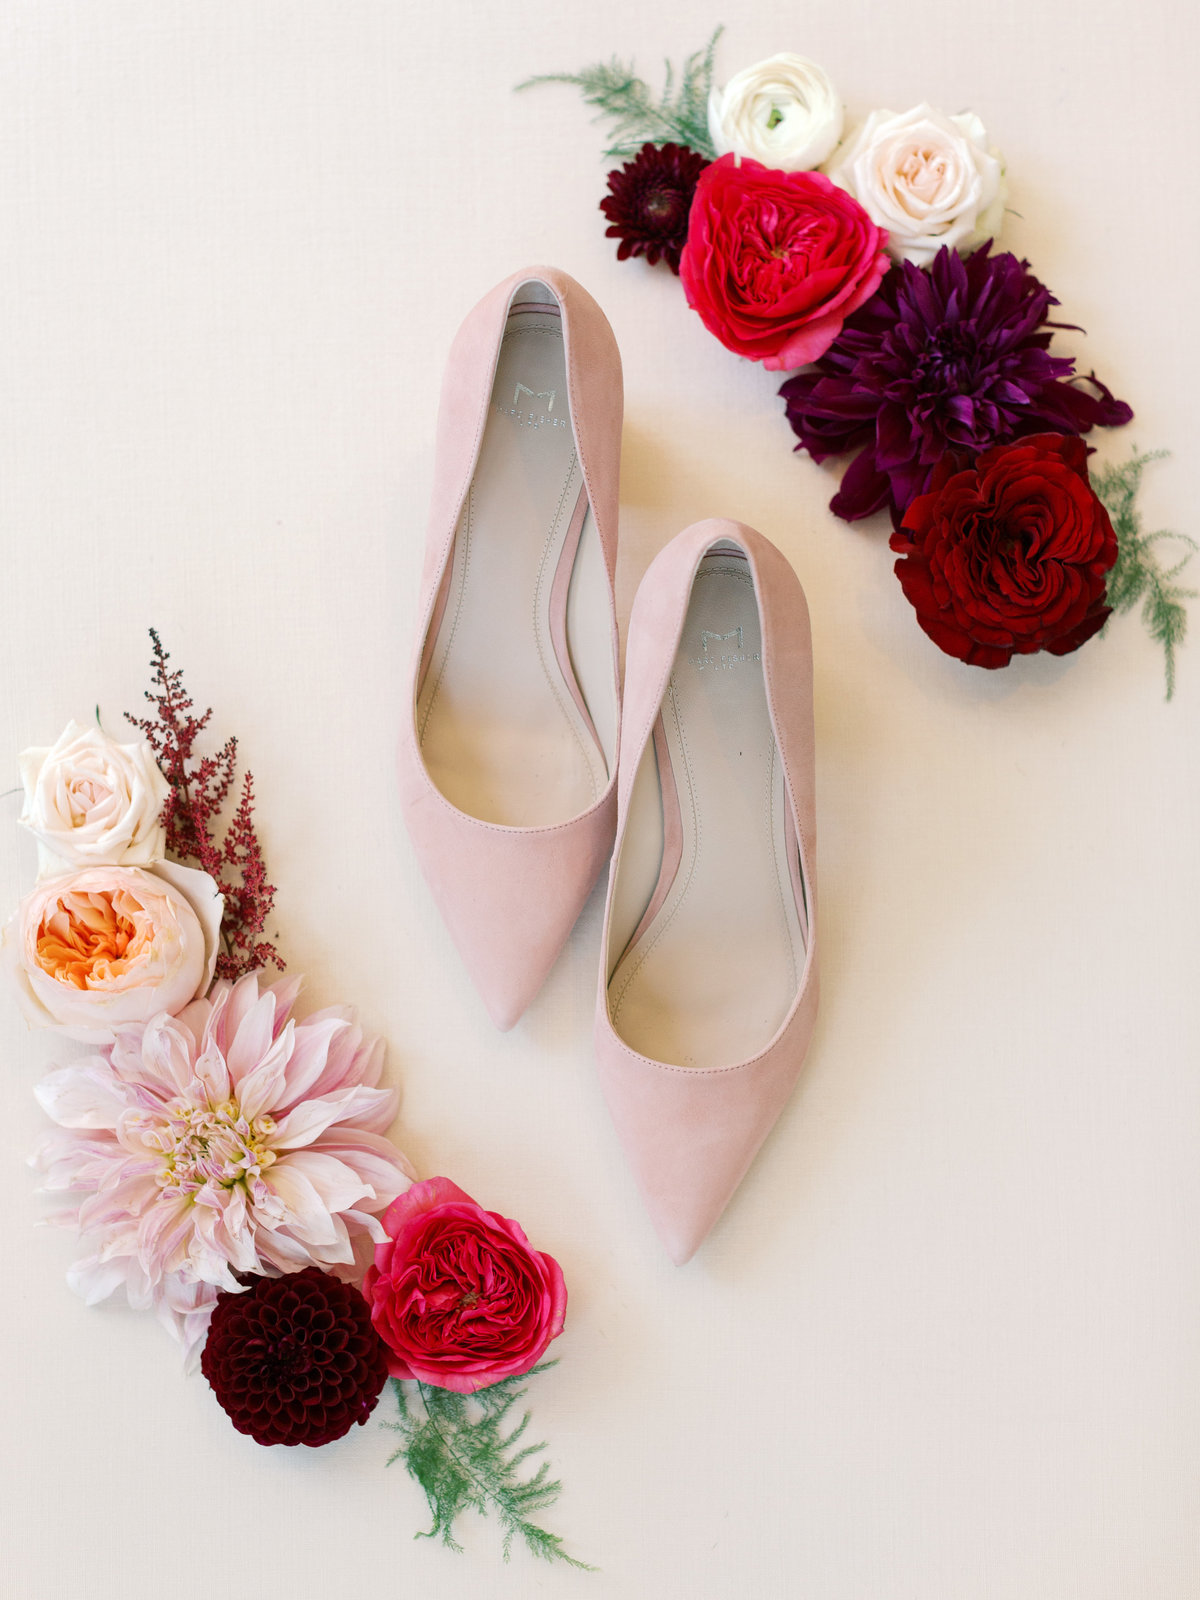 Bridal  flowers for detailed photography with bridal shoes